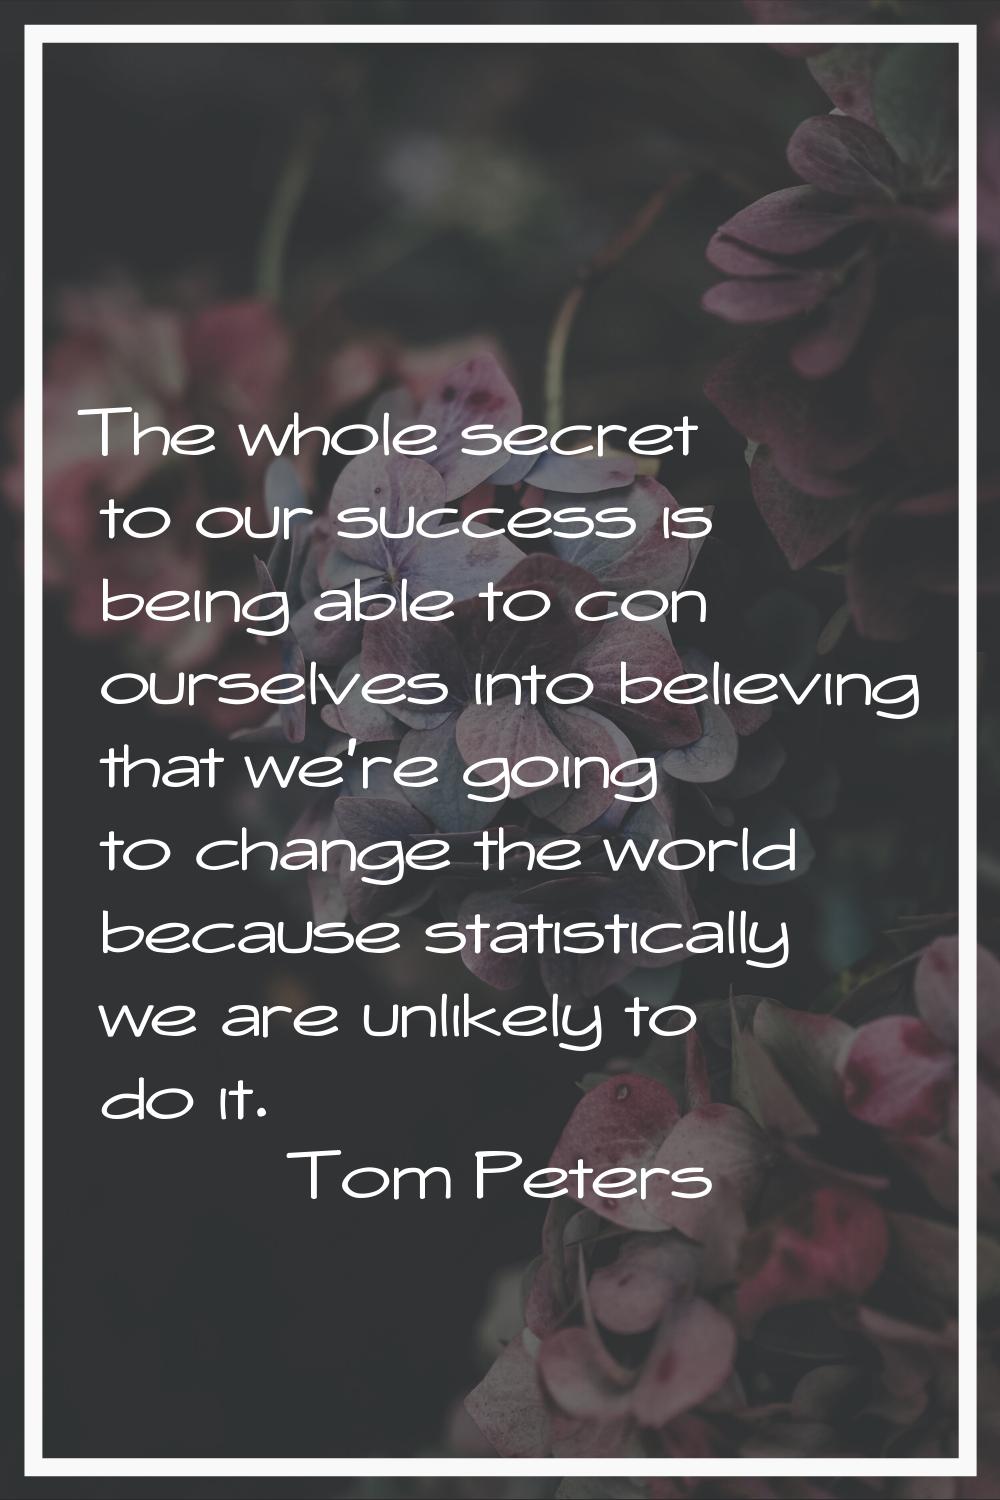 The whole secret to our success is being able to con ourselves into believing that we're going to c